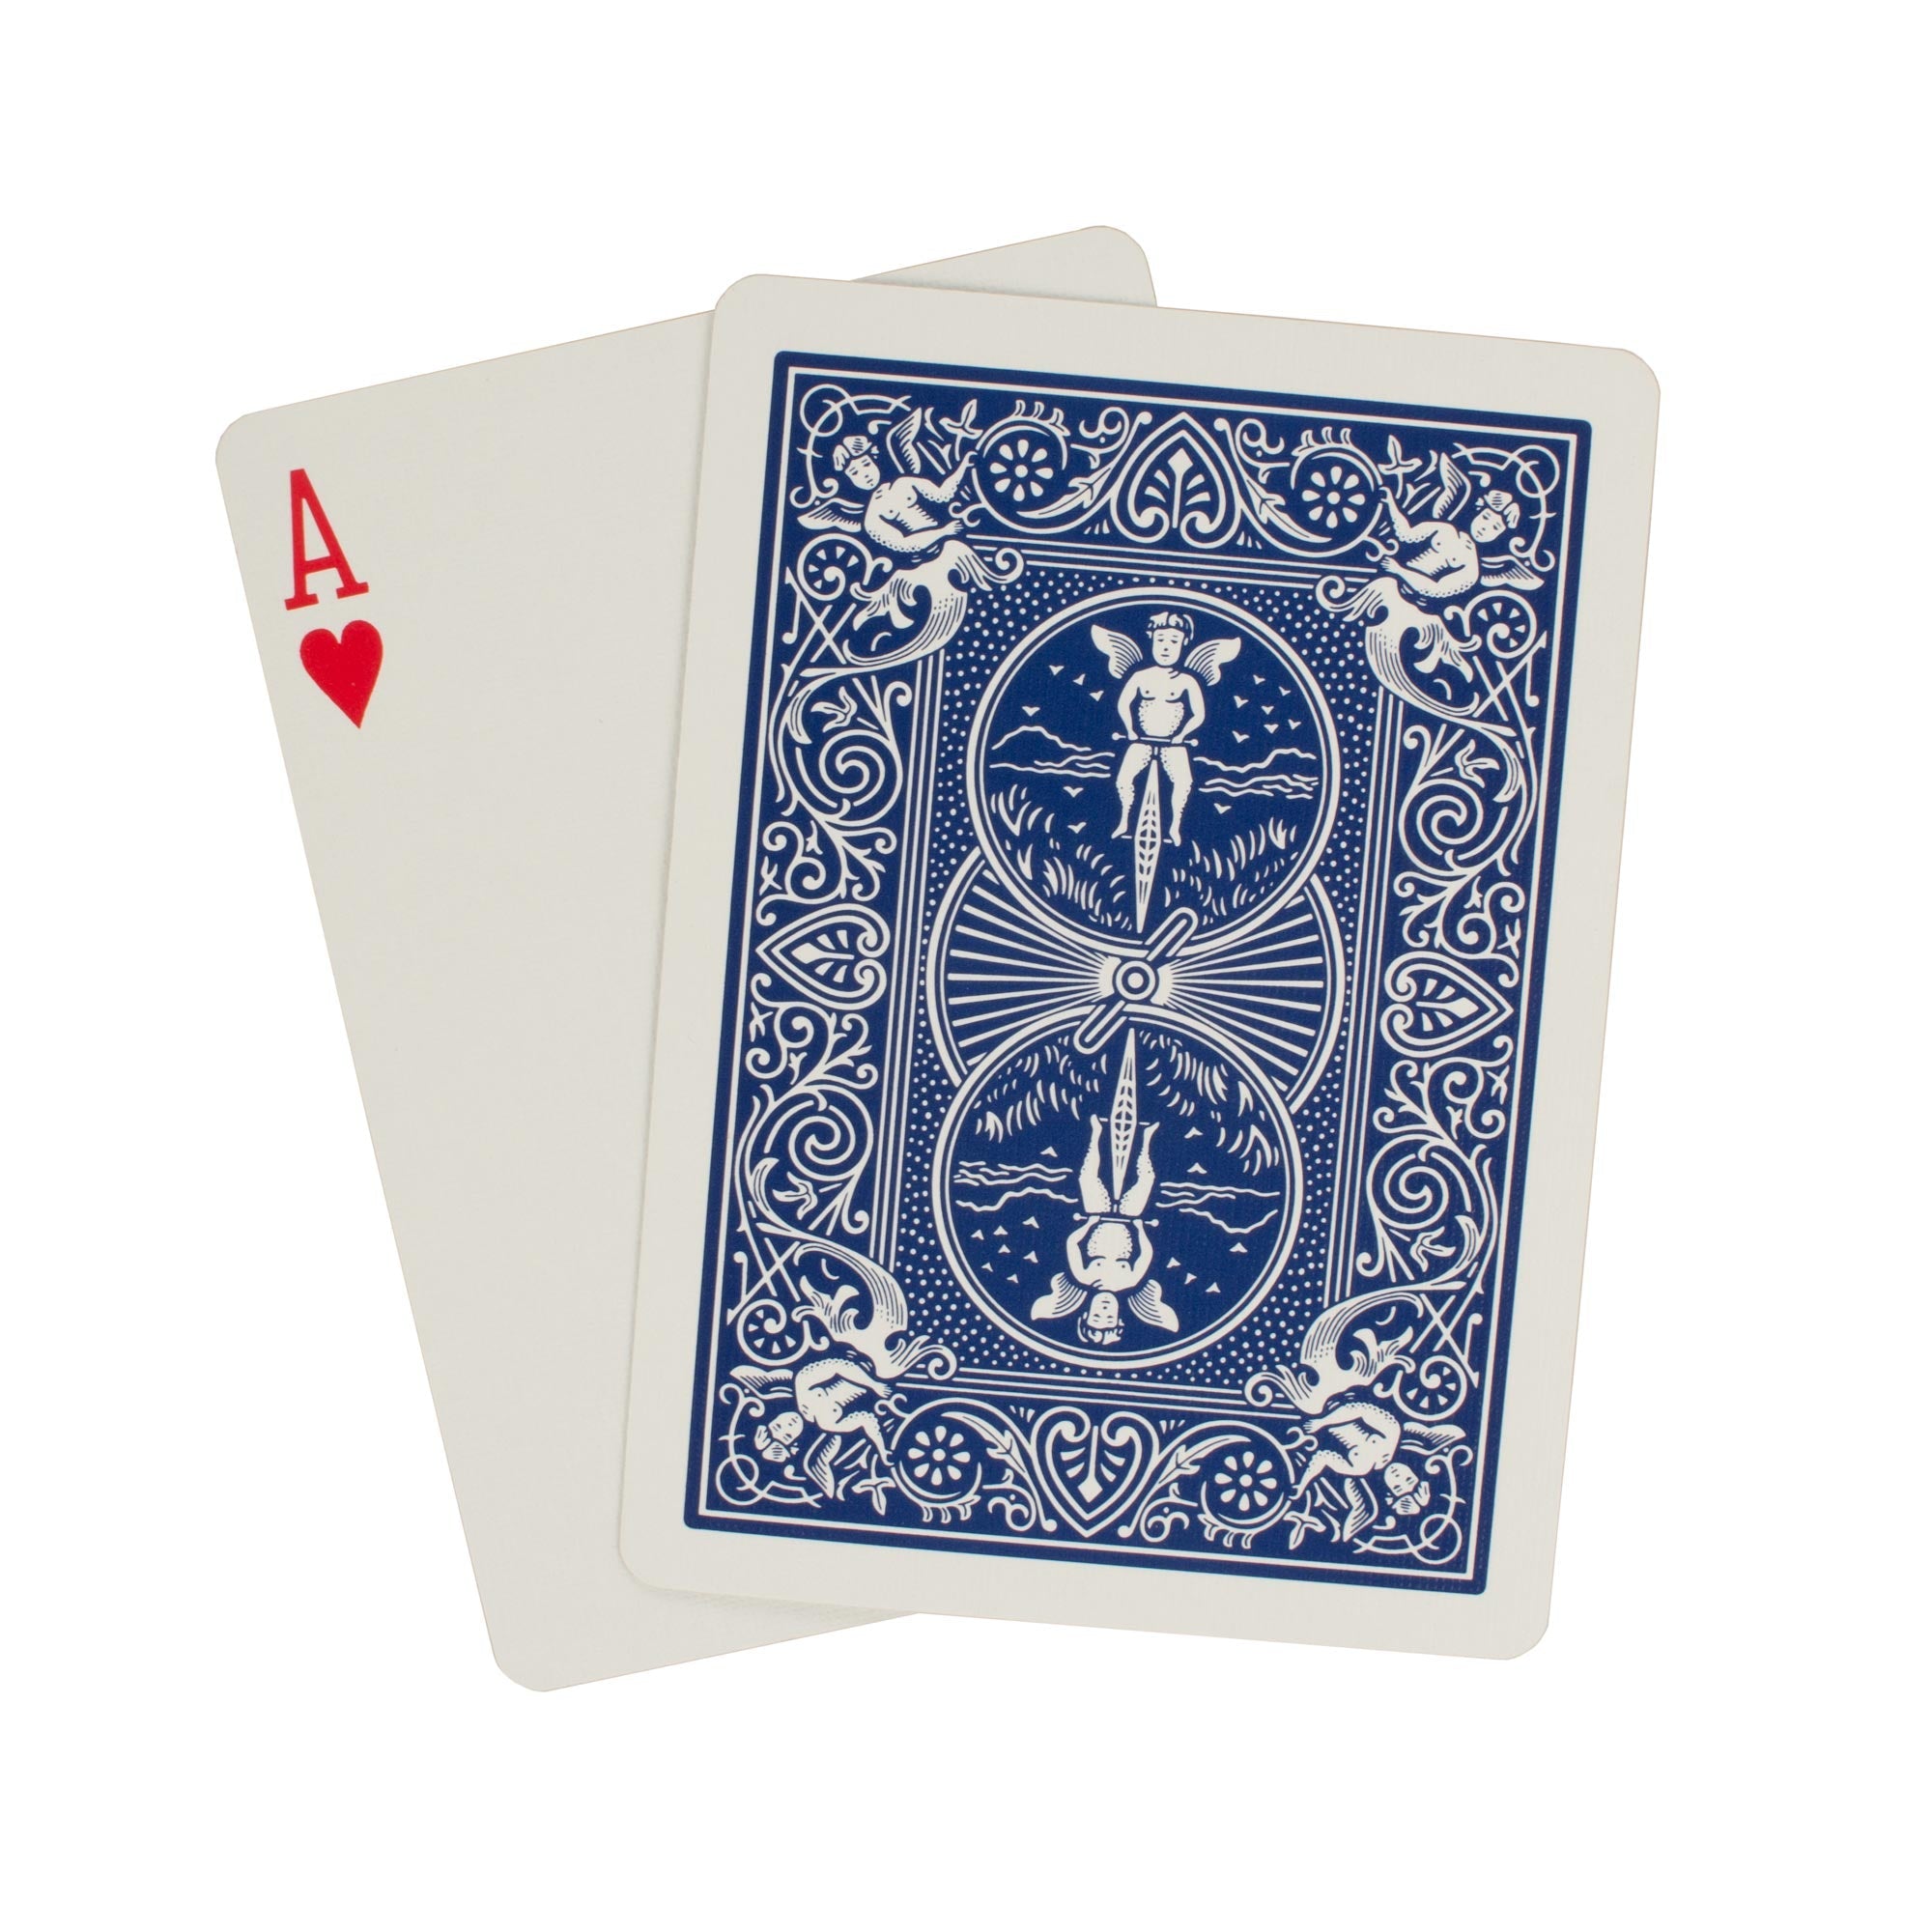 Bicycle Standard Deck blue back of cards